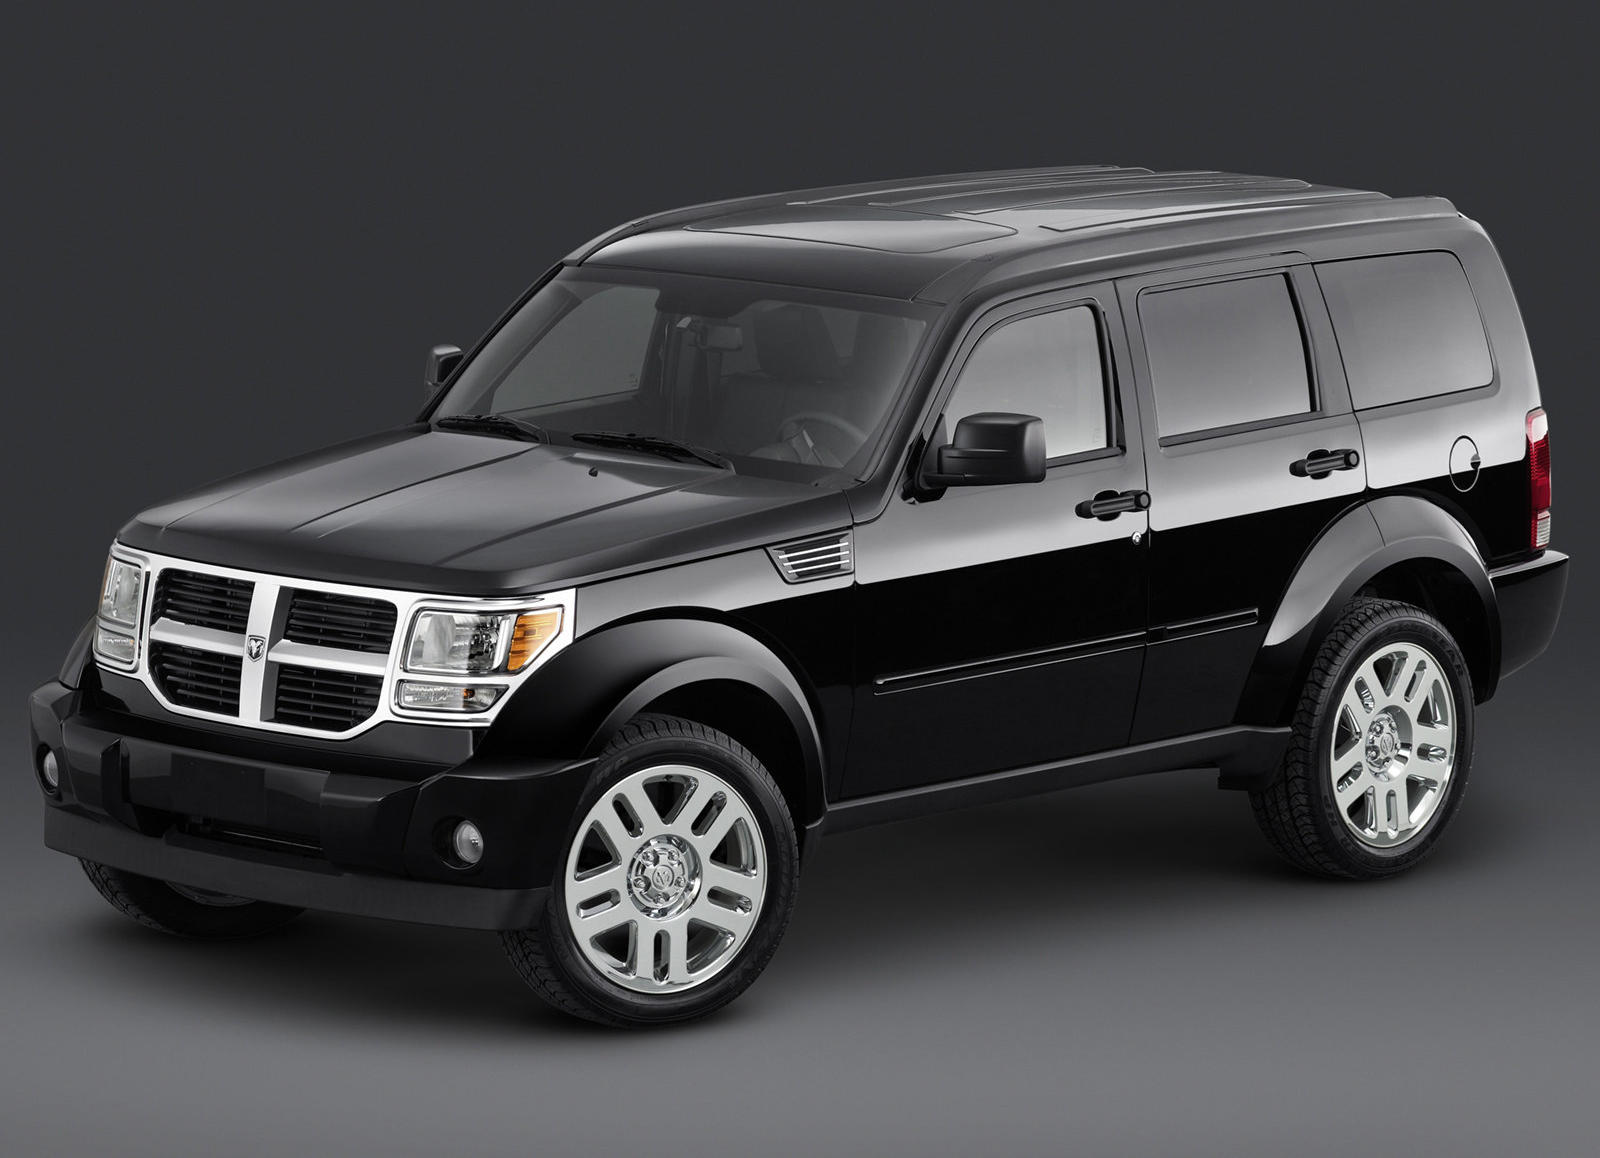 Used Dodge Nitro With Remote Engine Start For Sale Near Me ...